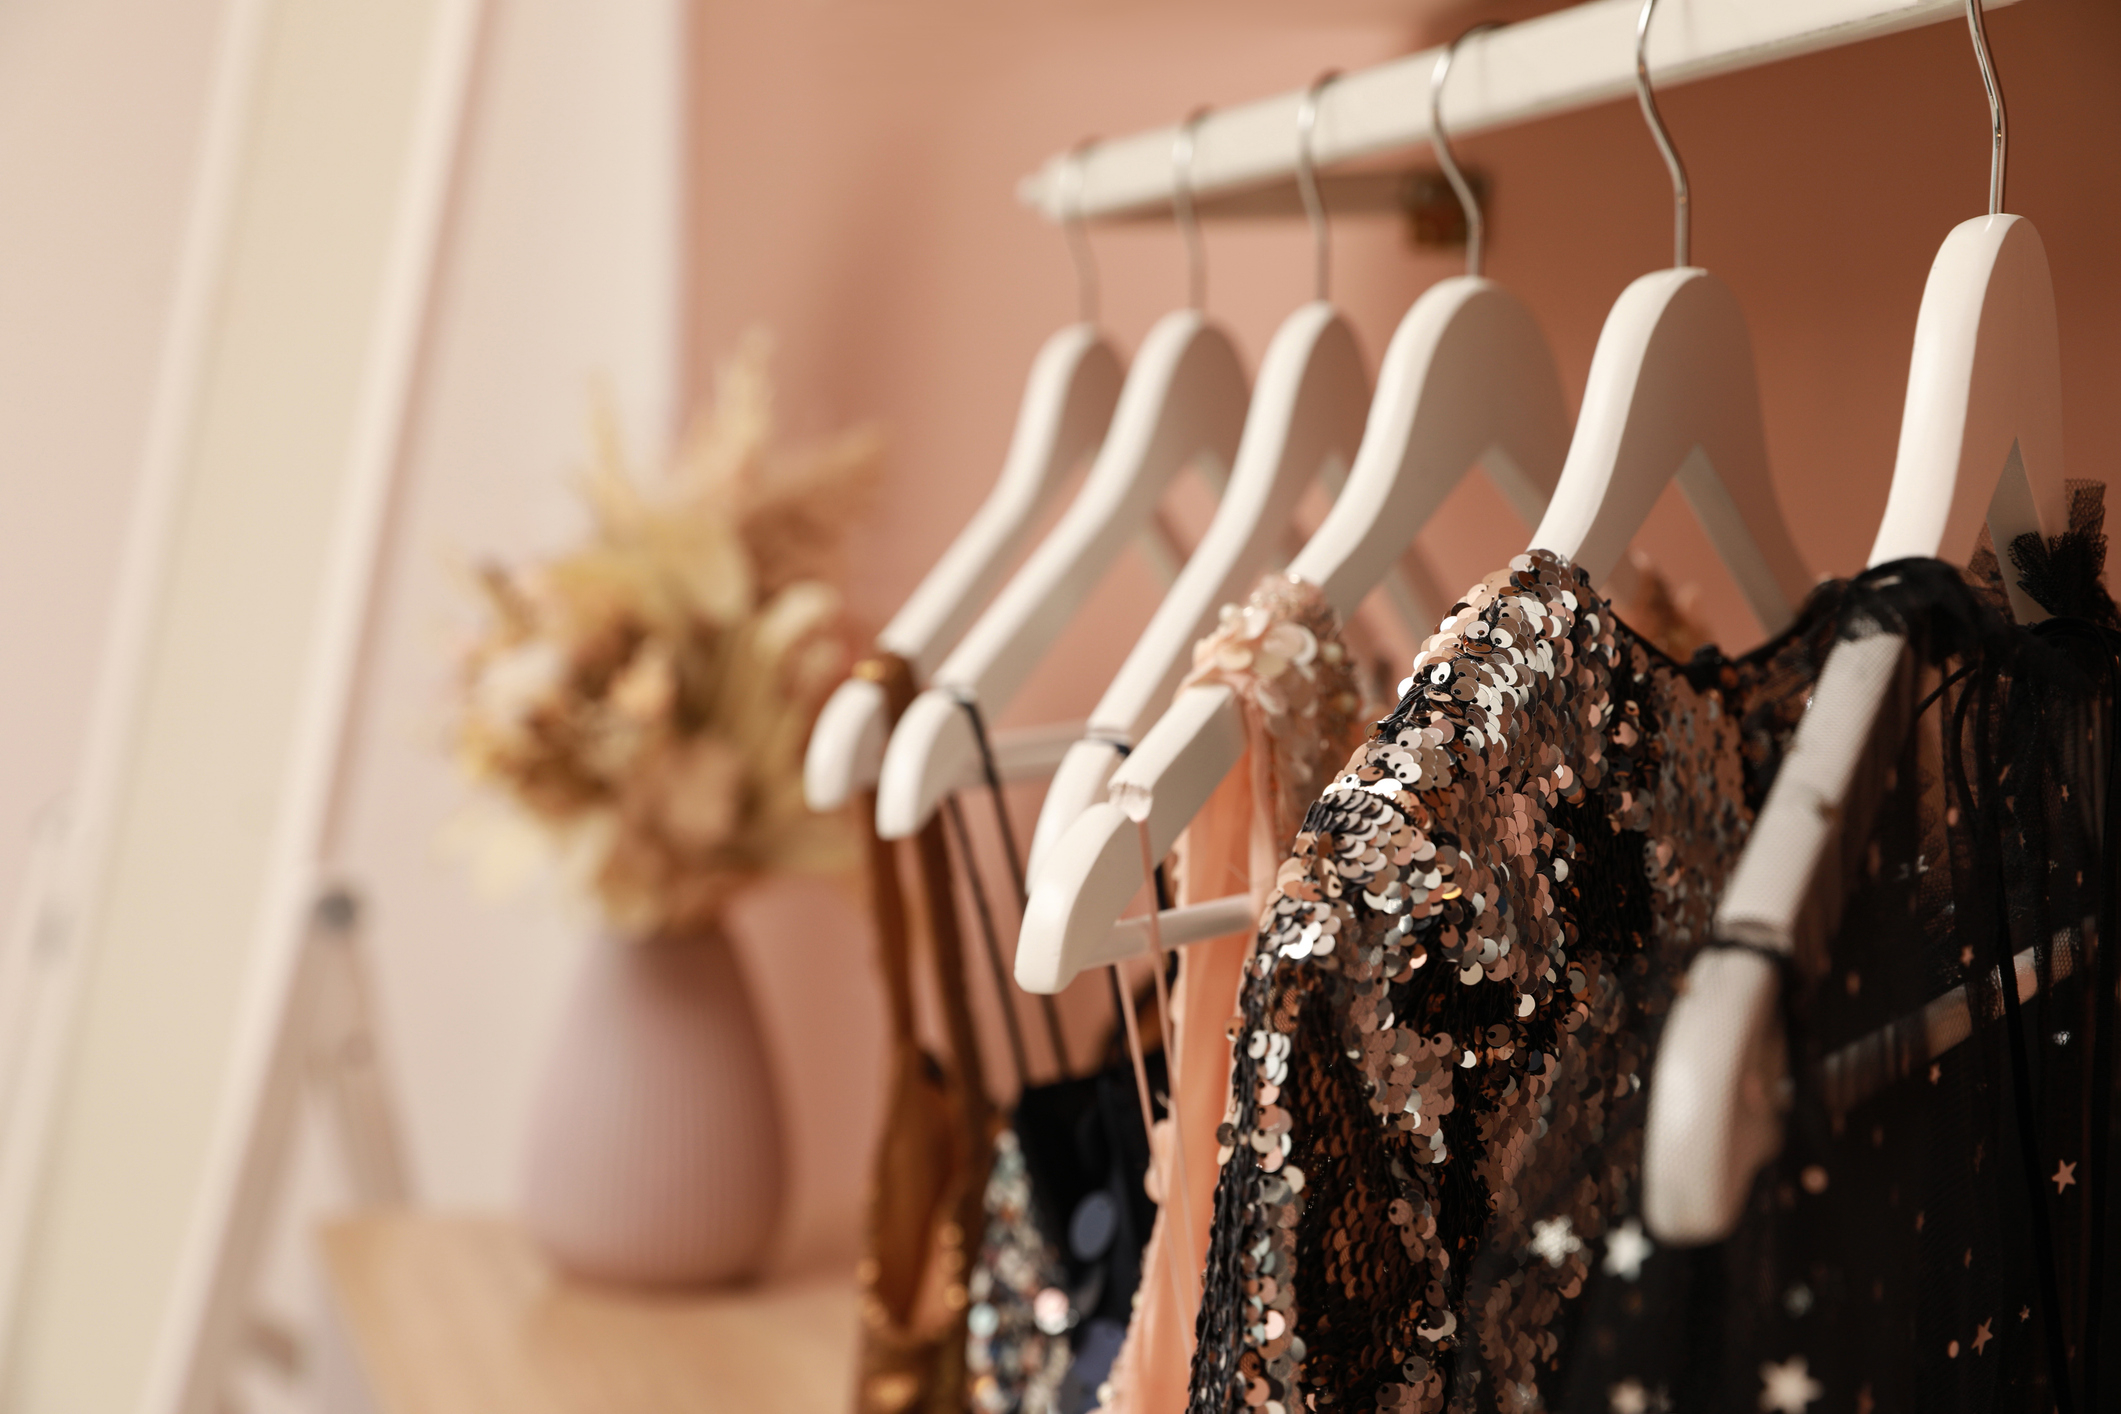 Assorted elegant garments on hangers, featuring sequined designs, likely for a professional or upscale setting